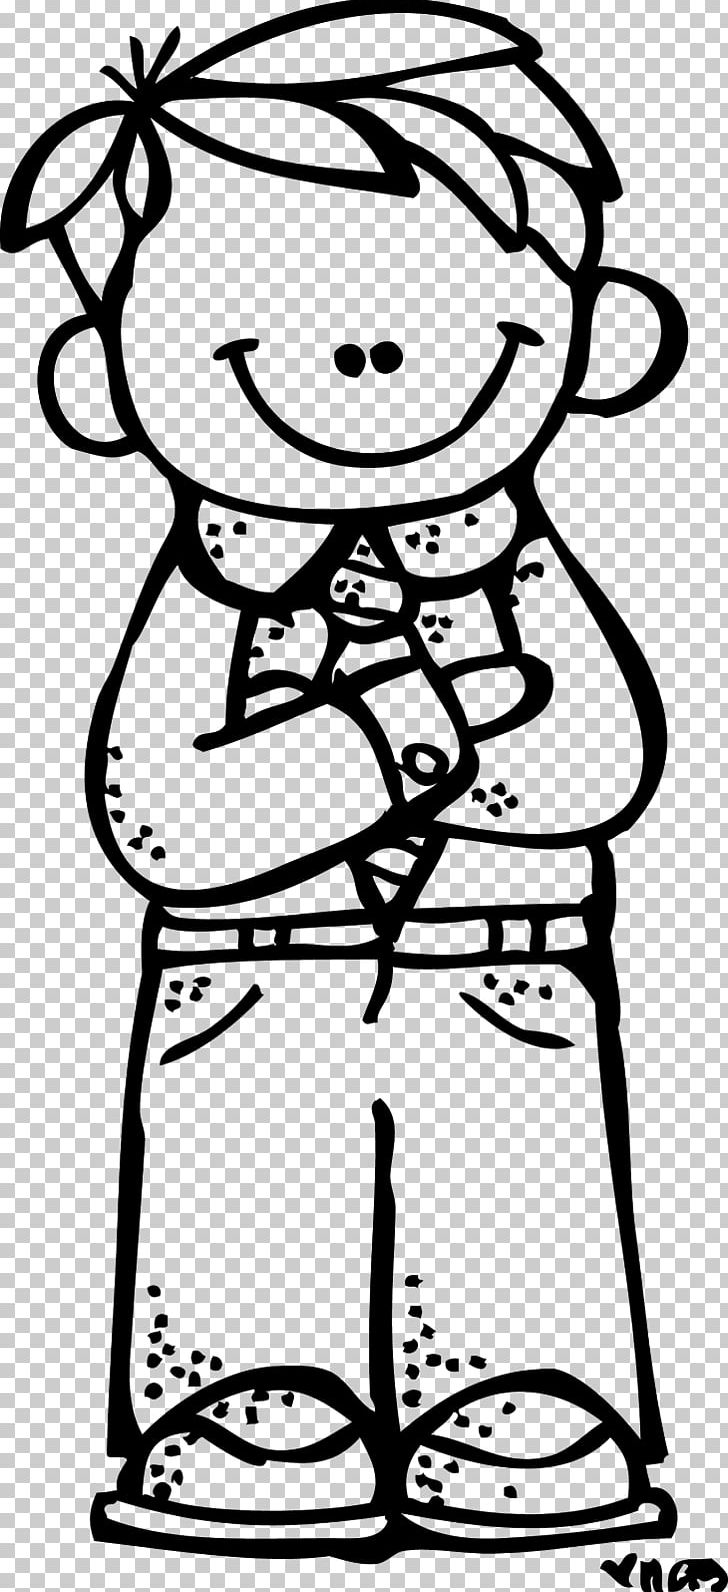 Child Drawing Boy PNG, Clipart, Adult, Art, Black, Black And White, Boy Free PNG Download